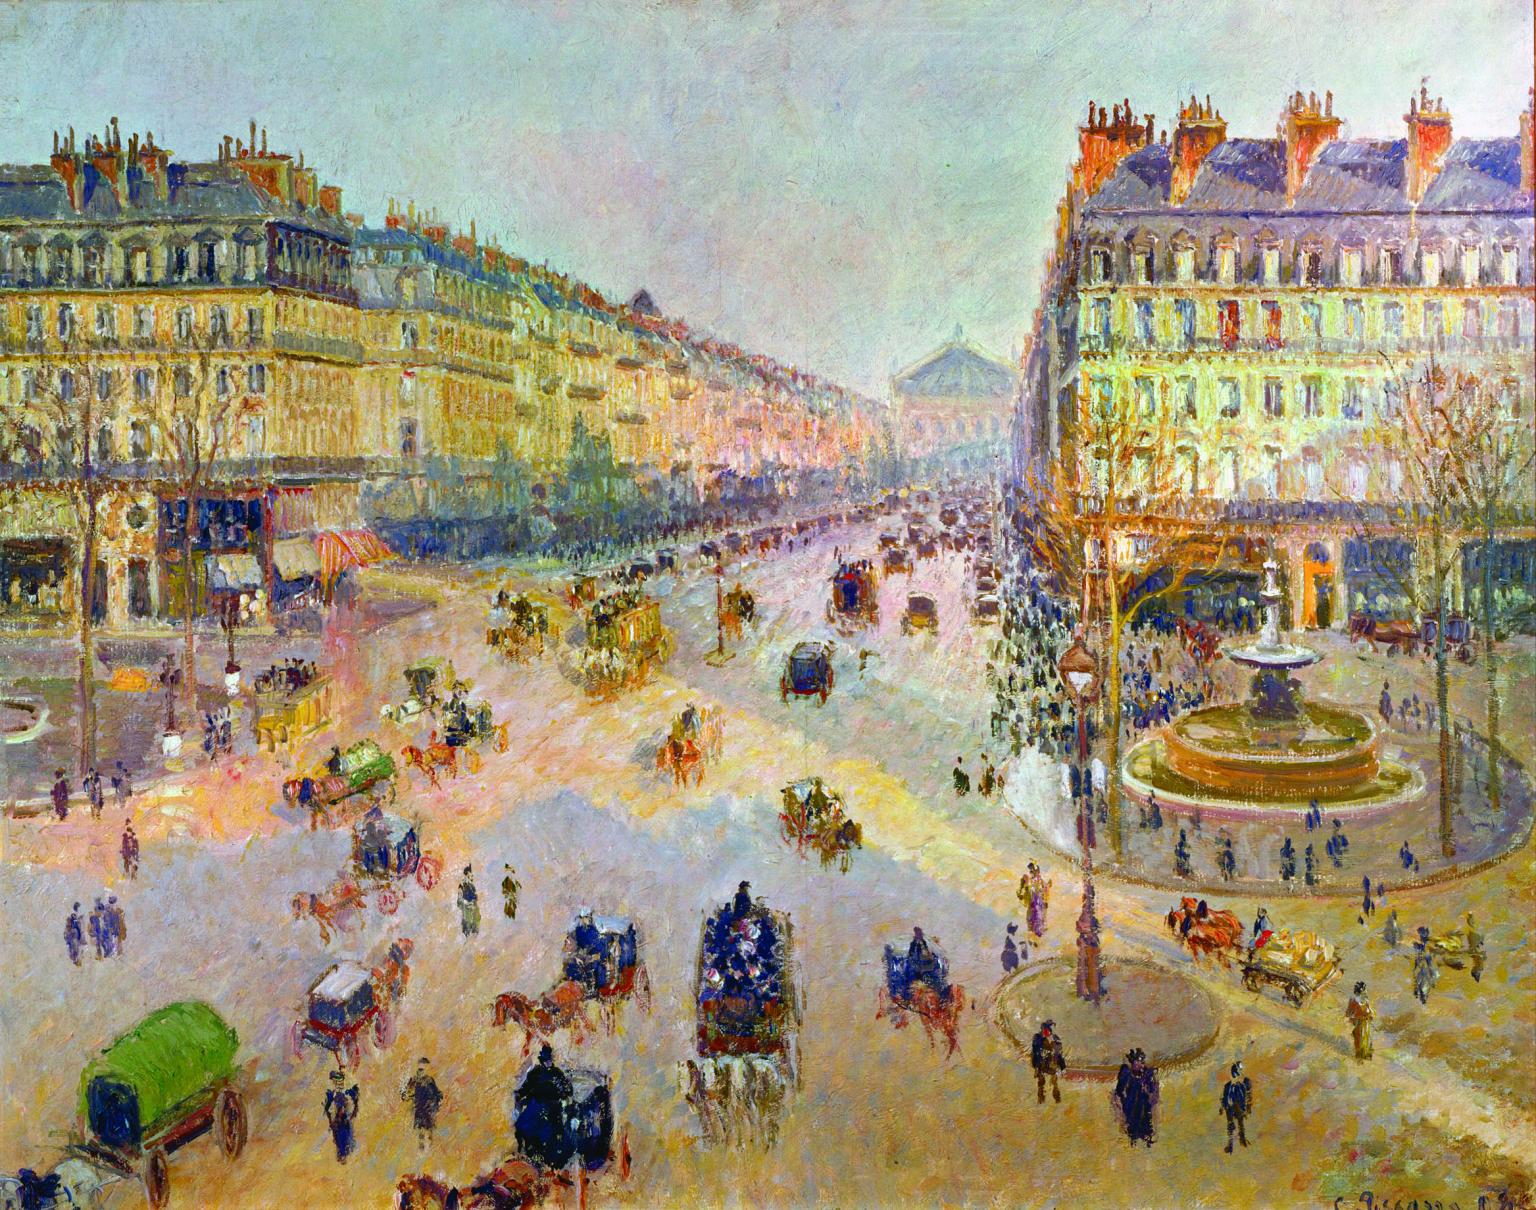 Painting depicting aerial view of sunny, busy city street with large fountain, and horses and wagons, and people walking throughout.  